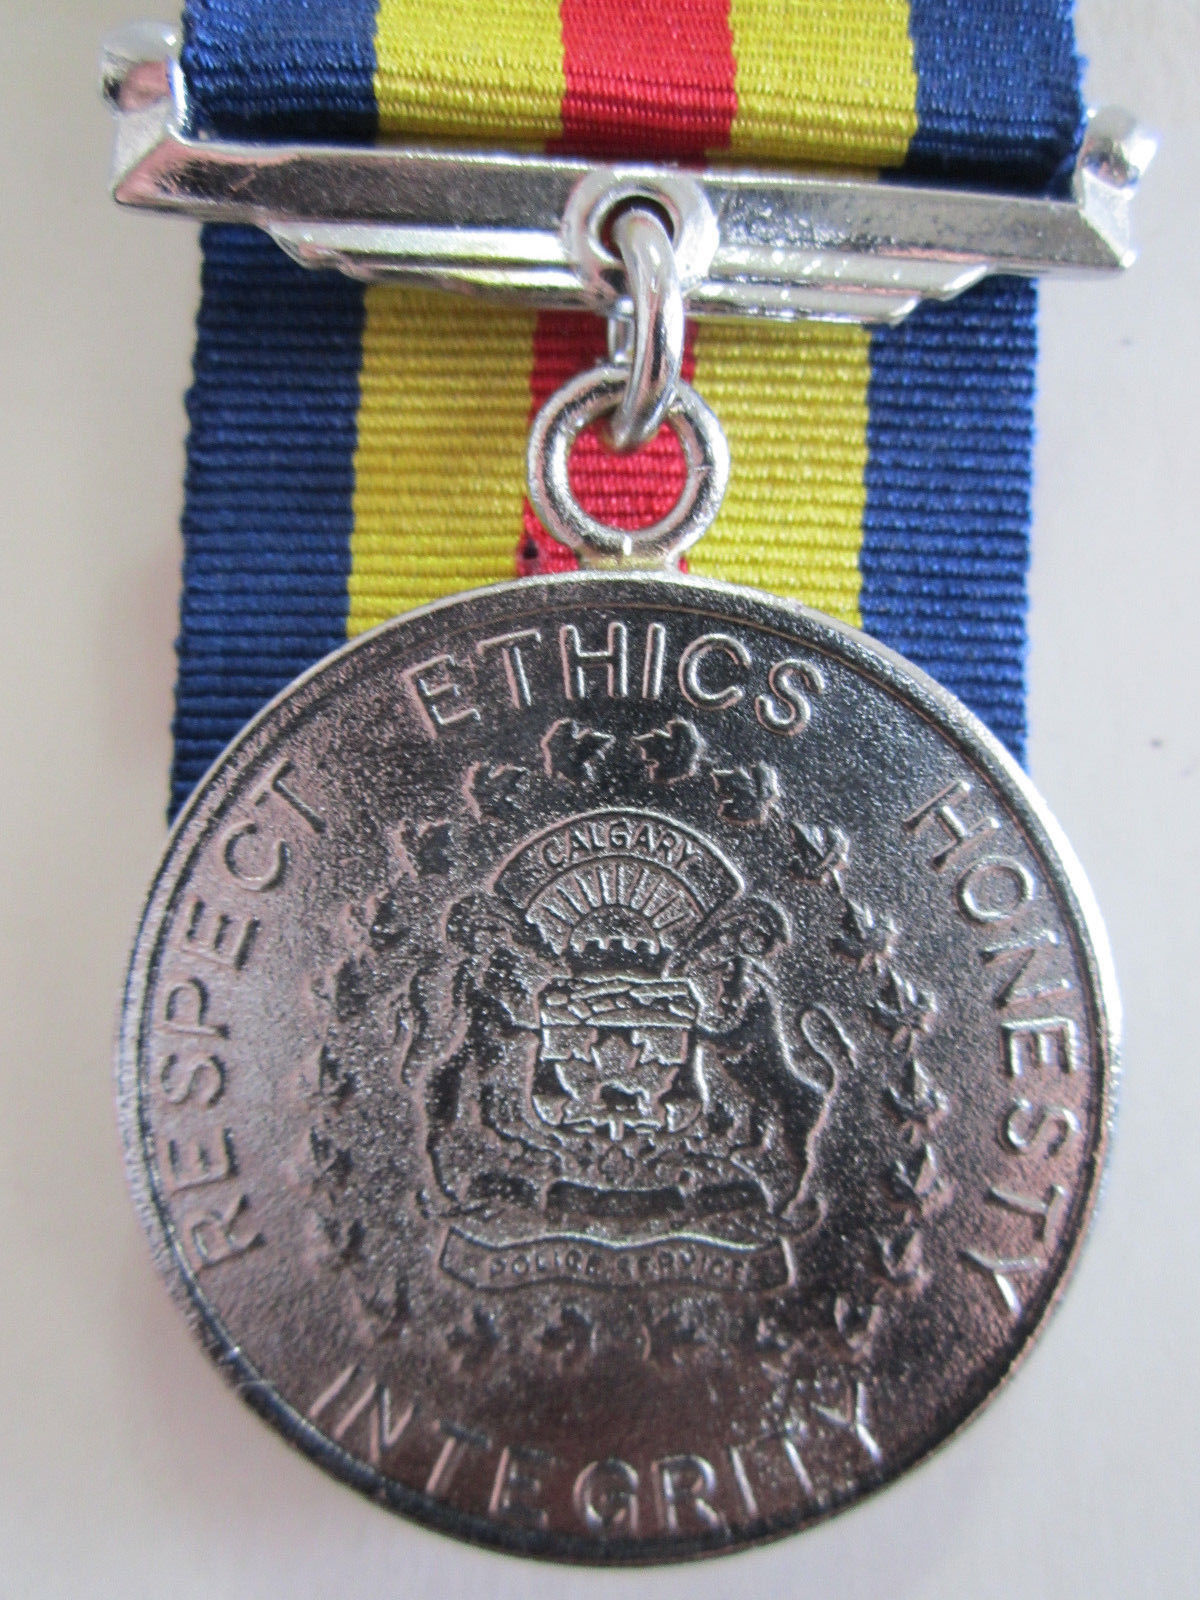 What are some common police service ribbons?